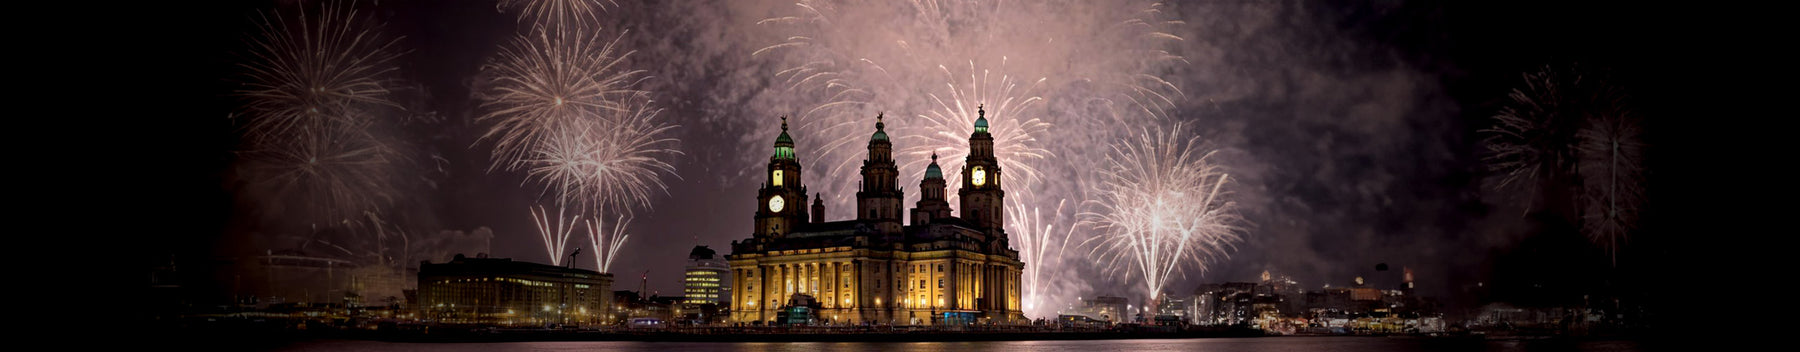 Queen Anne Naming Ceremony: A Spectacular Evening in Liverpool